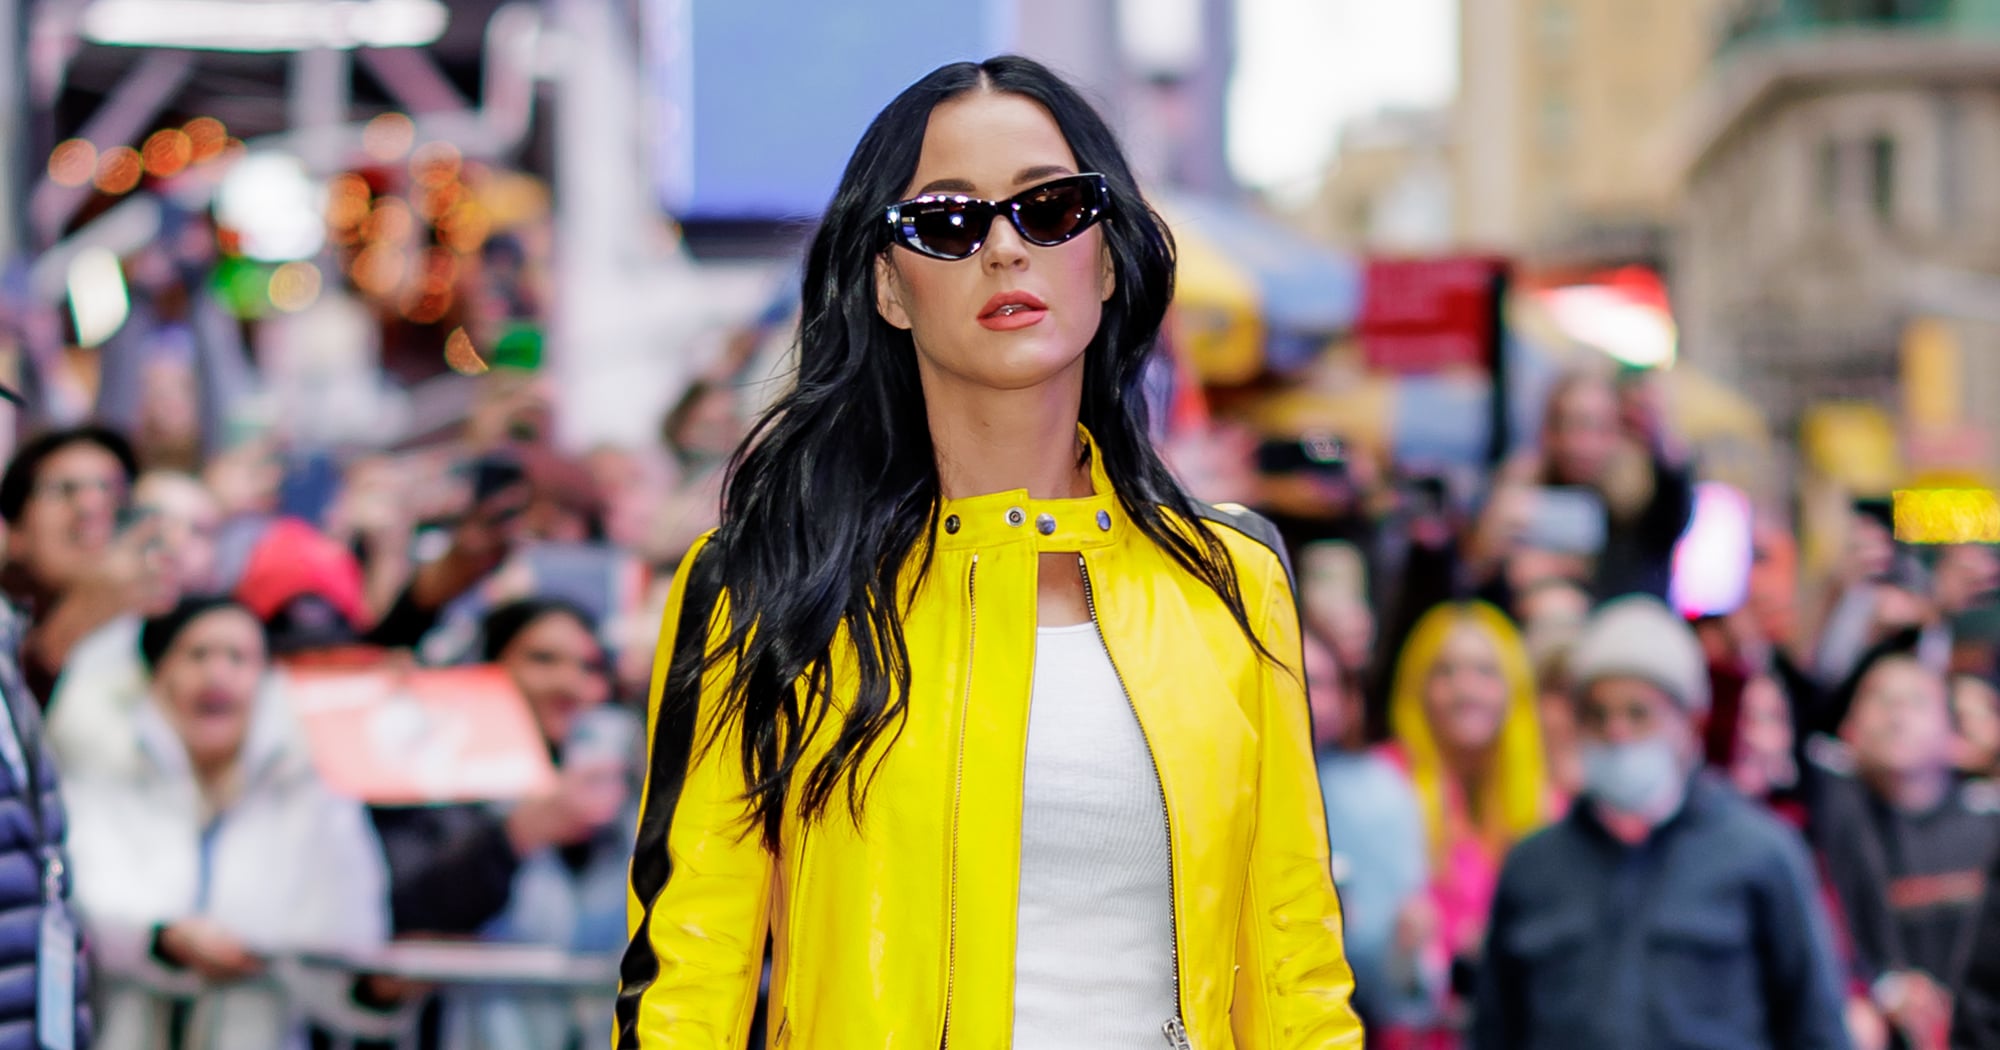 Katy Perry's Low-Rise Jeans and Yellow Moto Jacket in NYC | POPSUGAR ...